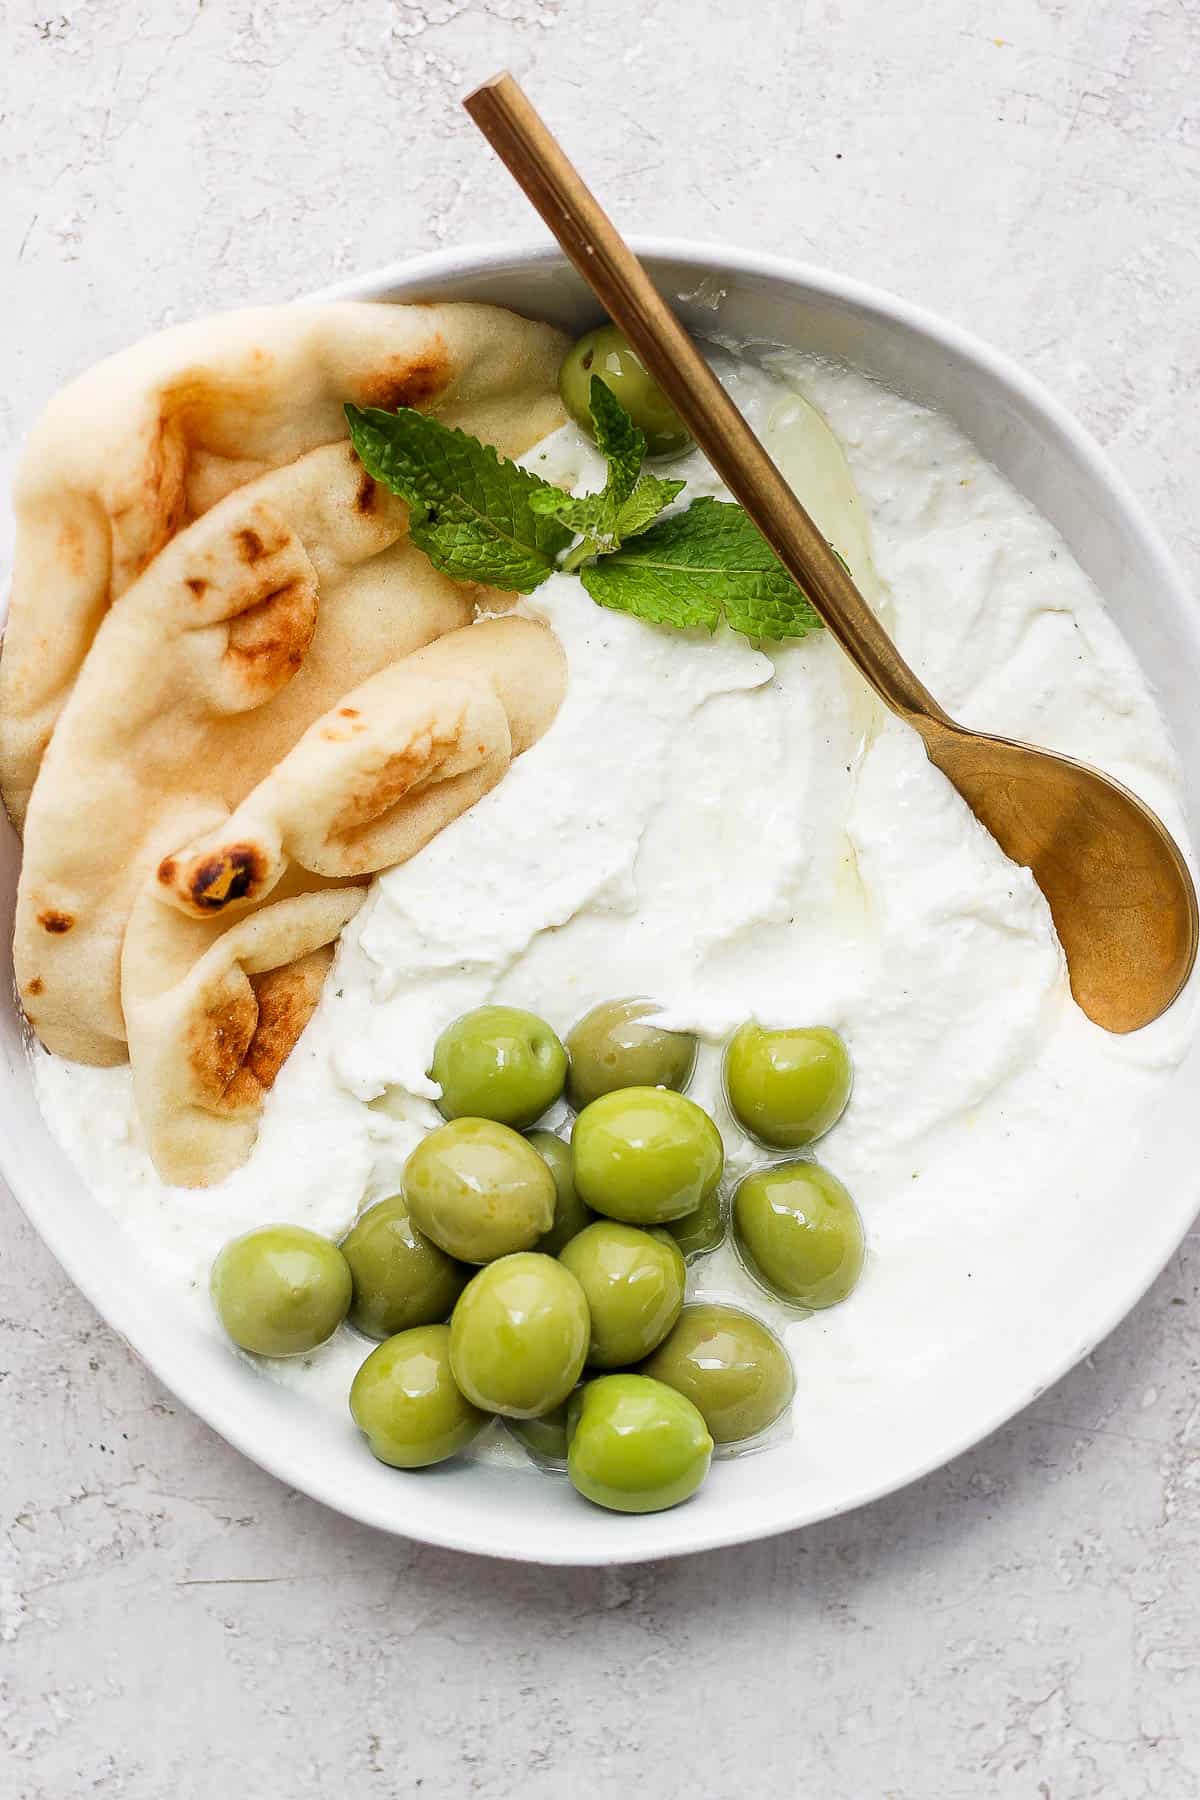 Whipped feta in a bowl accompanied by three pieces of pita bread, green olives, and a few mint leaves.